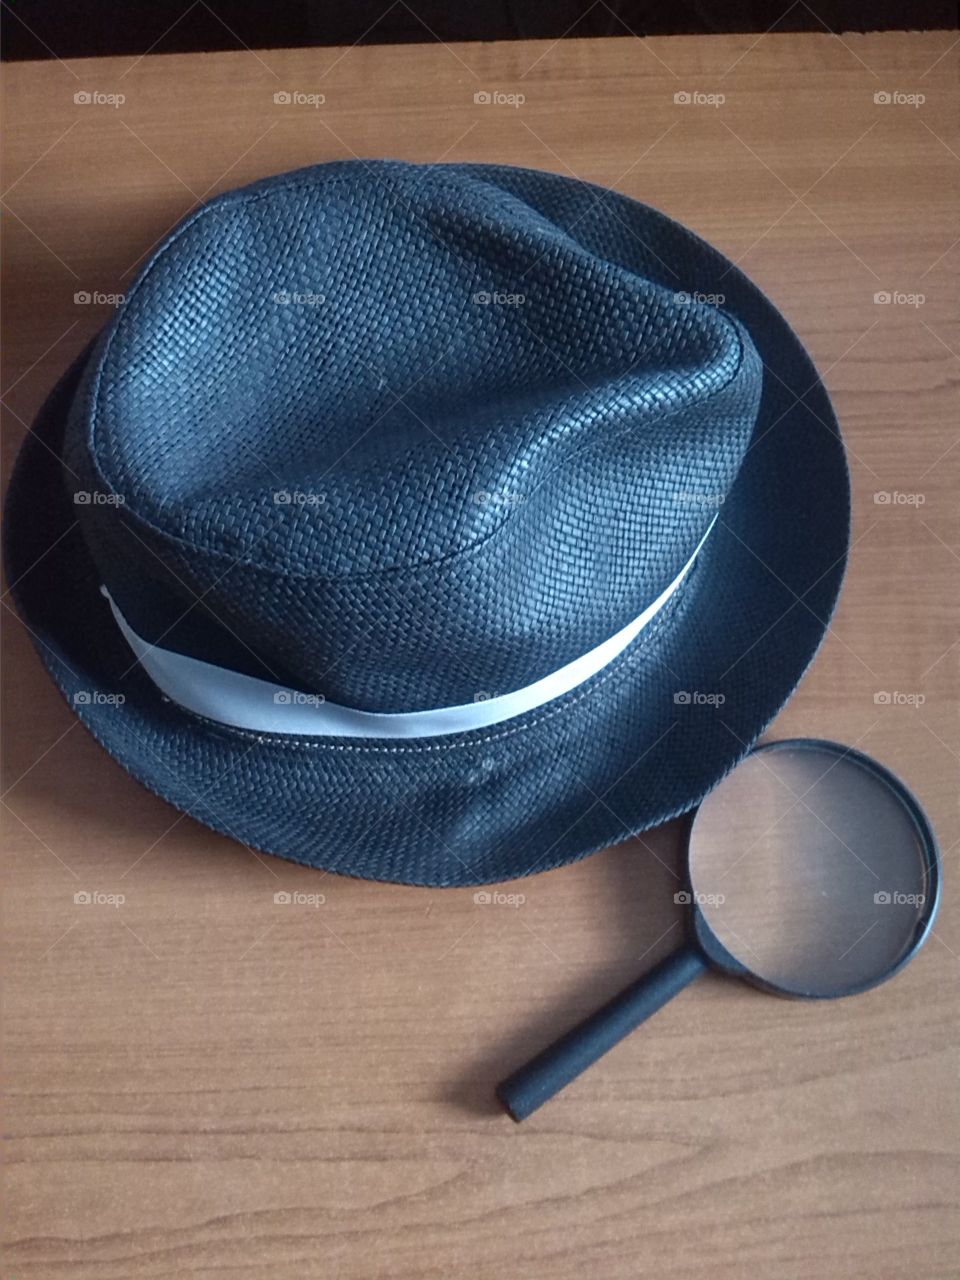 Black hat and magnifying glass